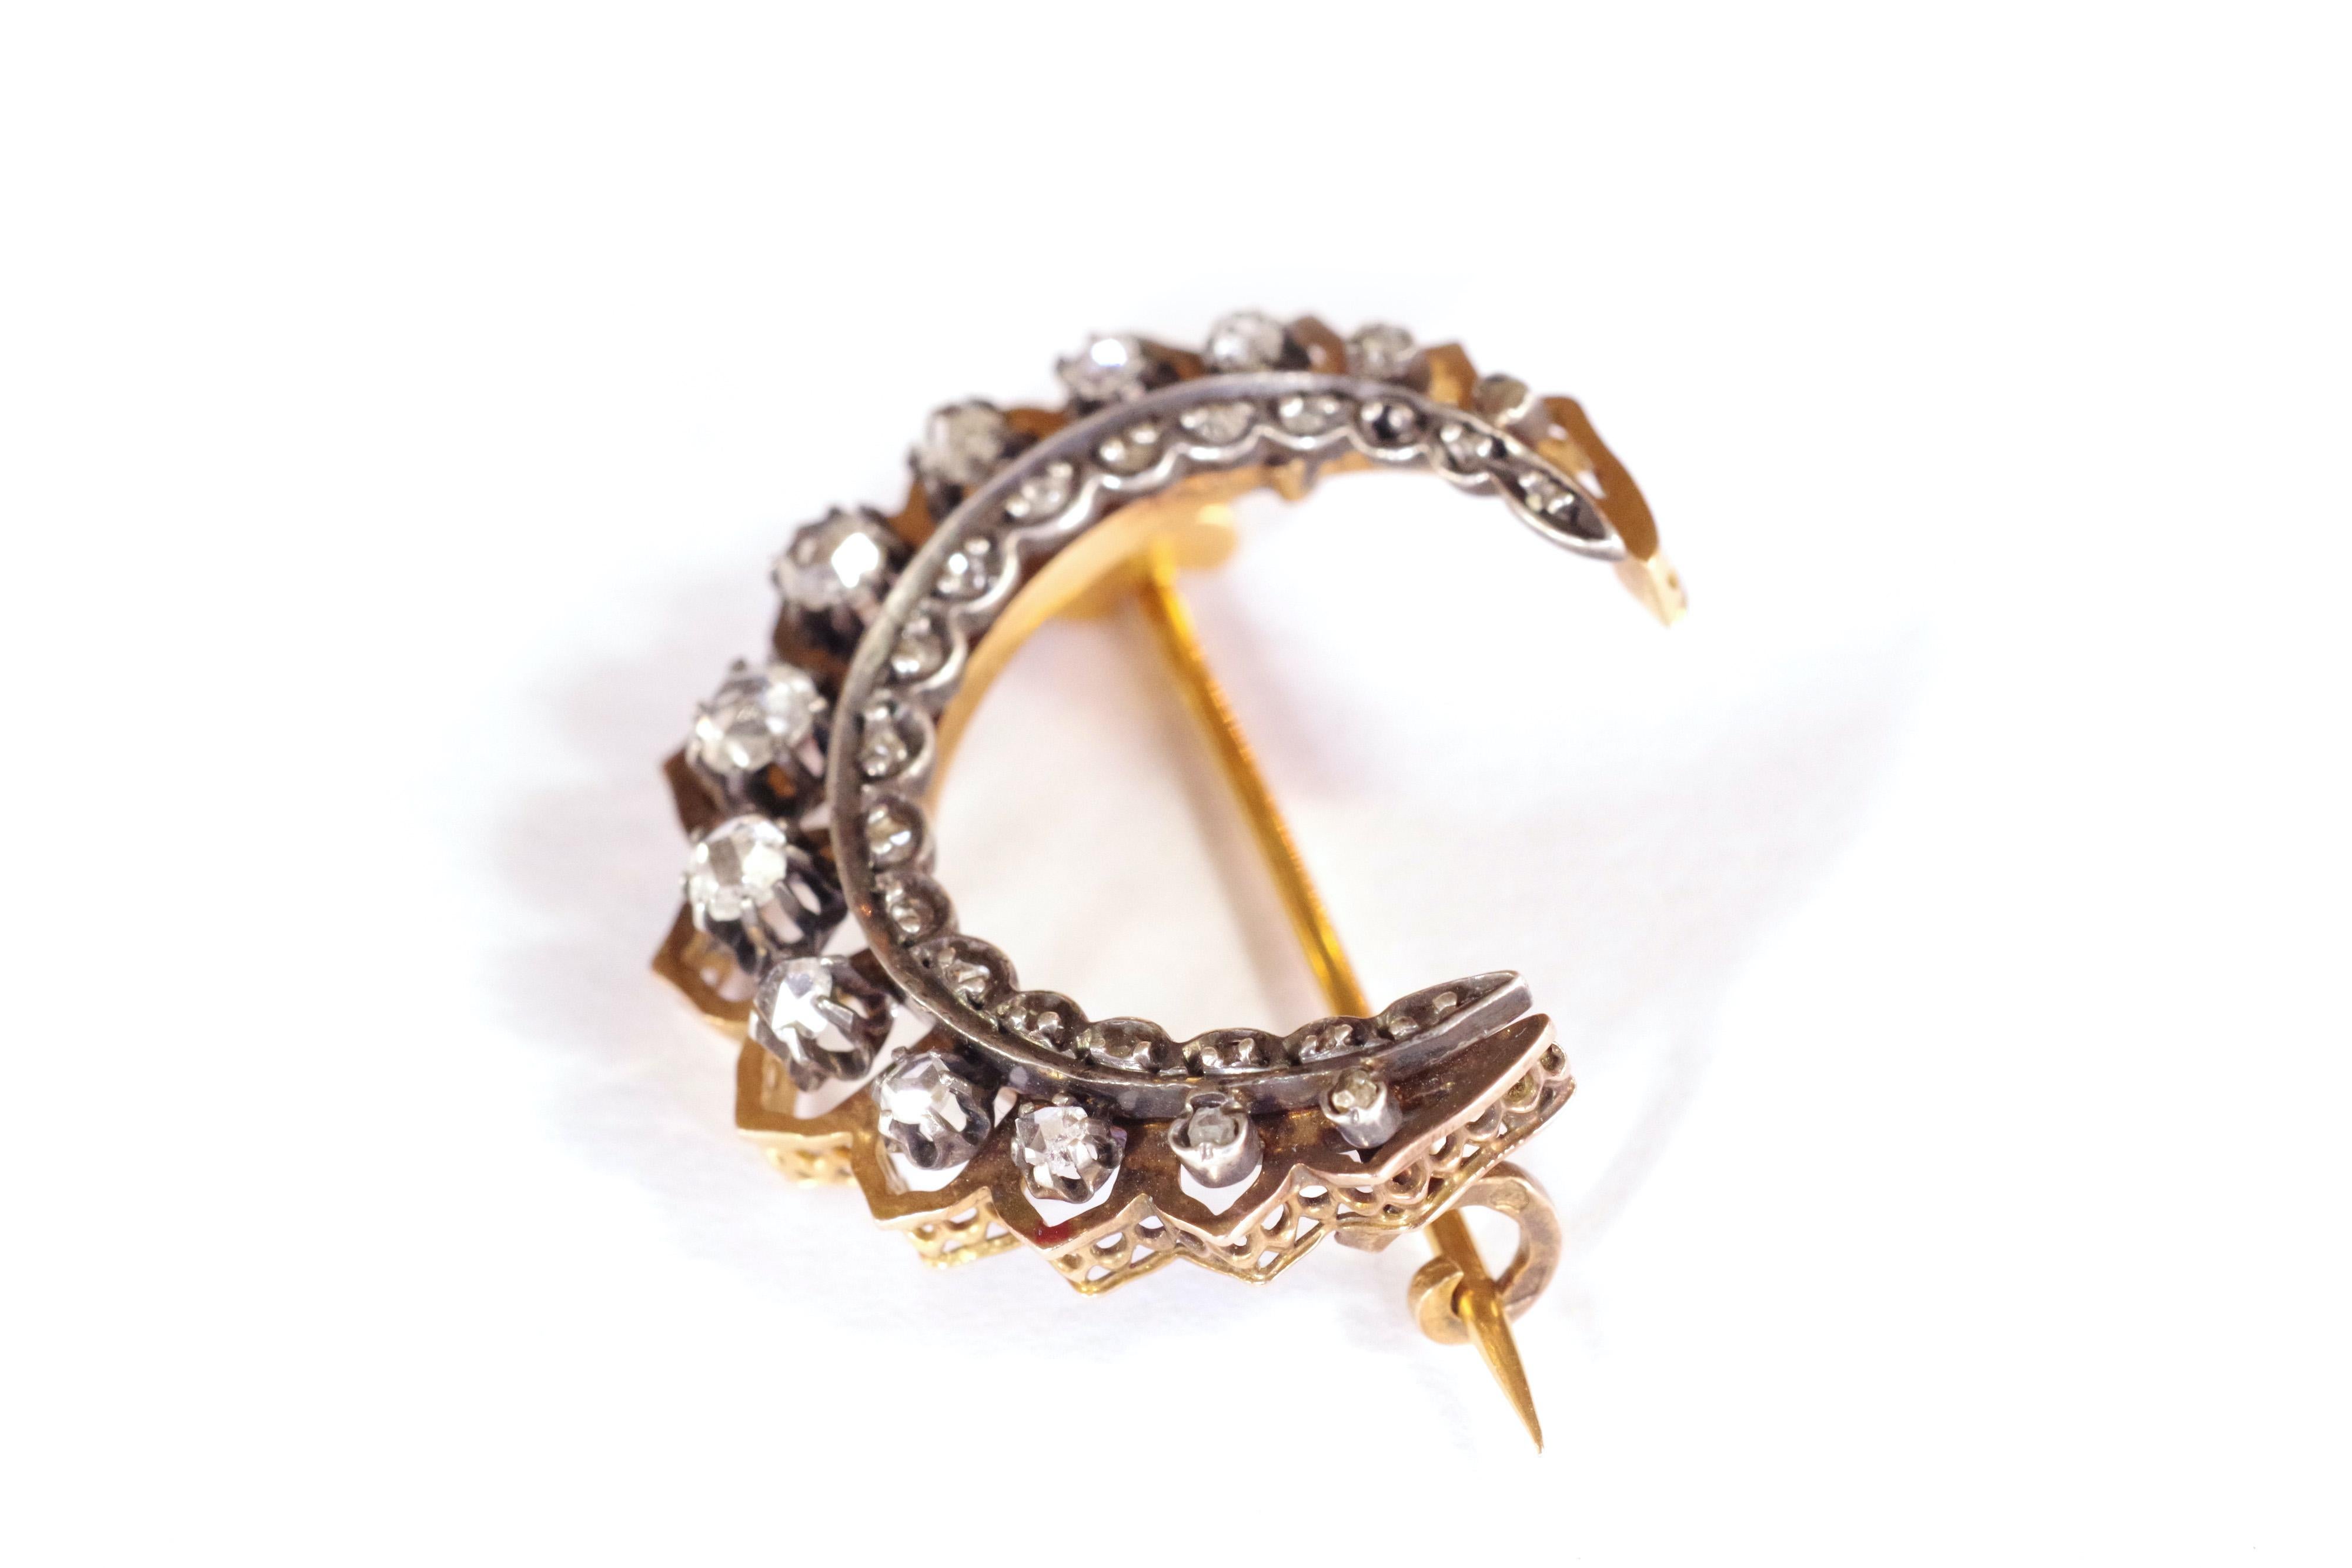 Victorian diamonds crescent moon brooch in 18 karat rose gold and silver. The brooch takes the shape of a crescent moon. The crescent is decorated with thirteen diamonds cut in Dutch rose, and set by claws. These diamonds are highlighted by an